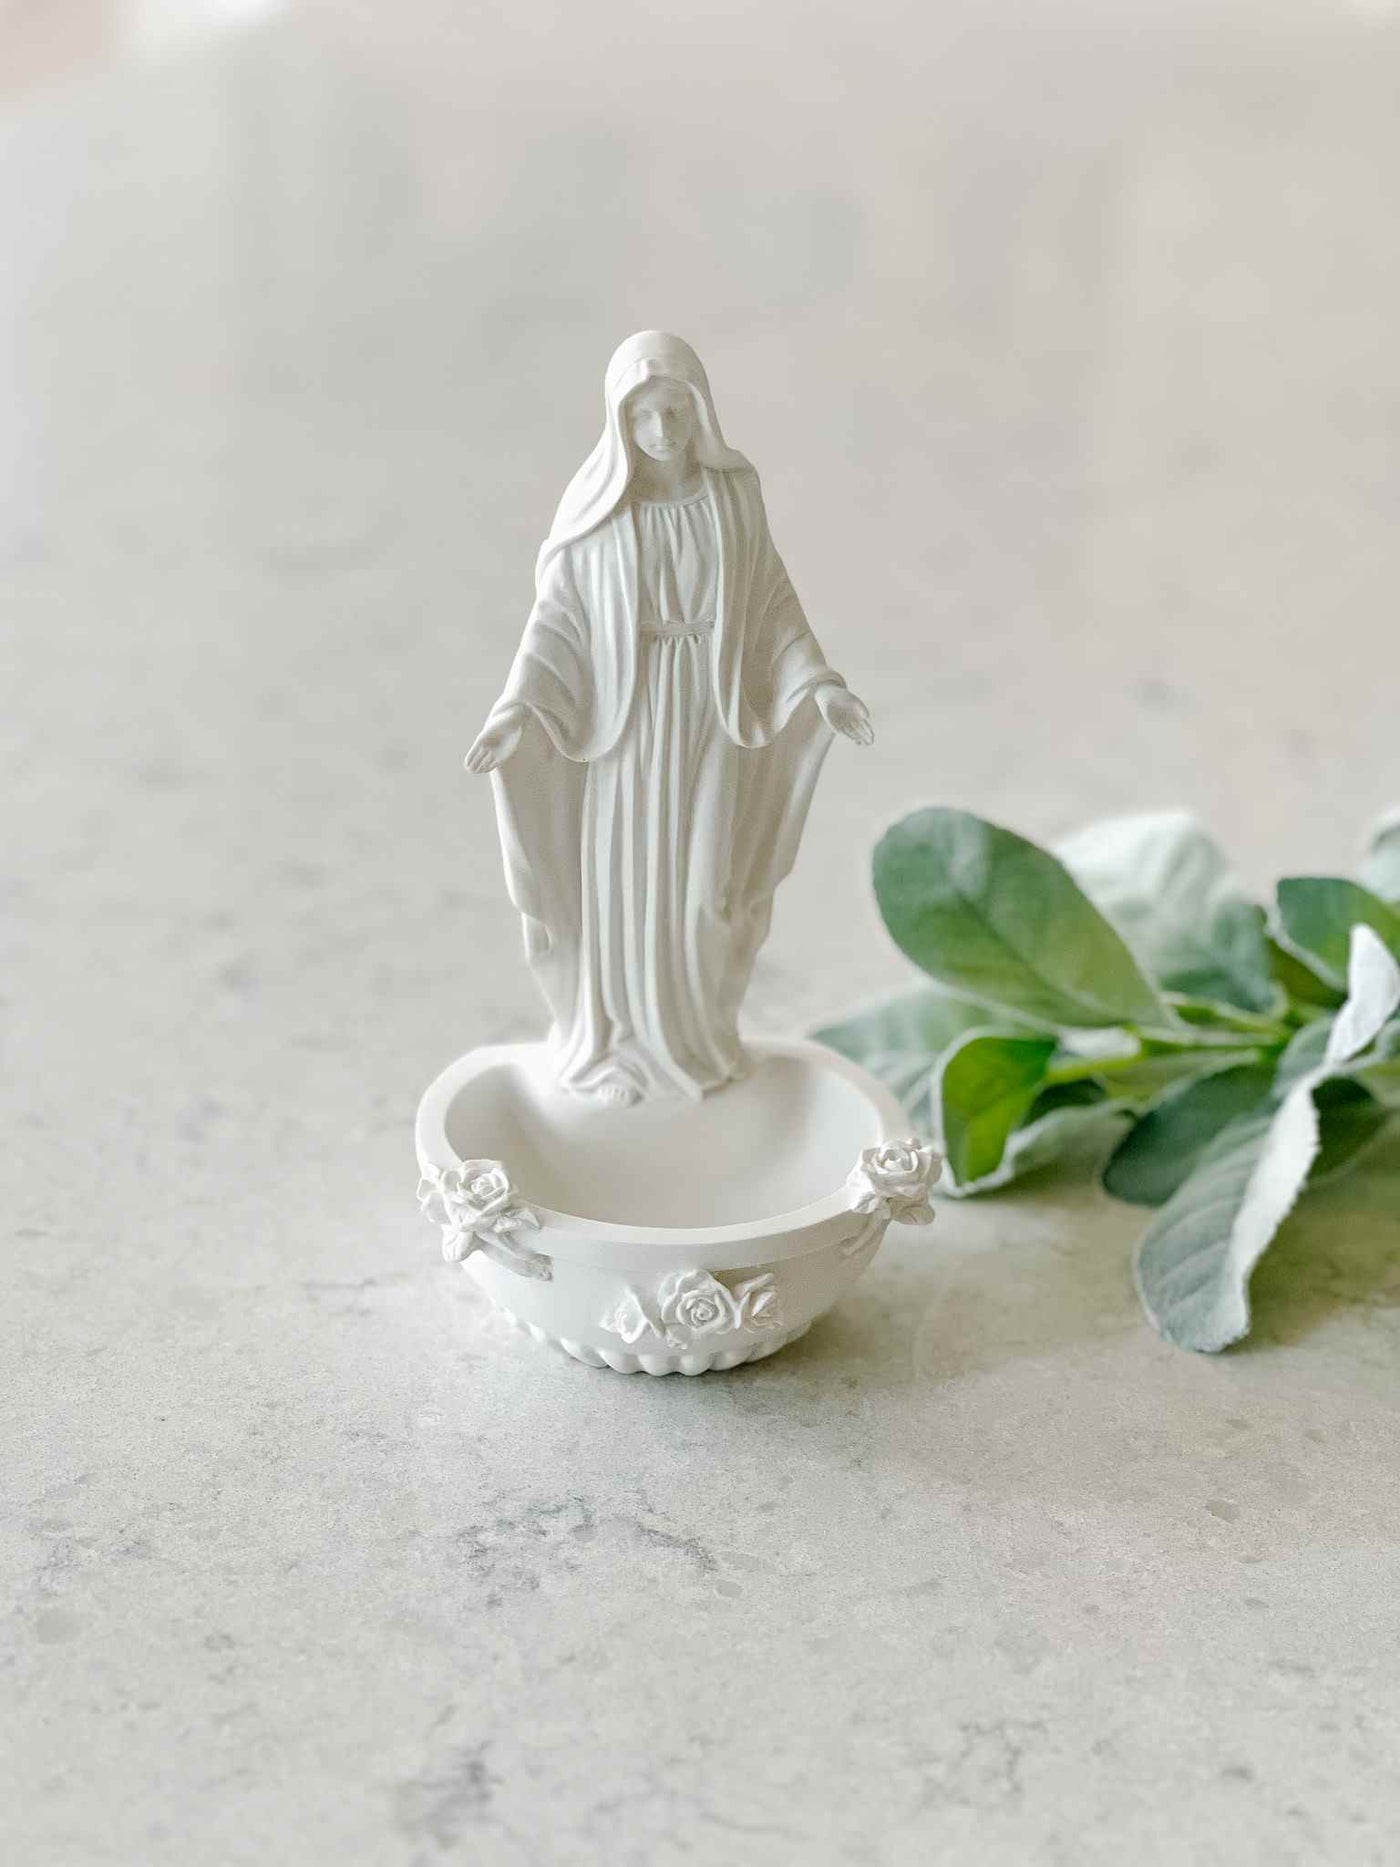 Our Lady of Grace Holy Water Font